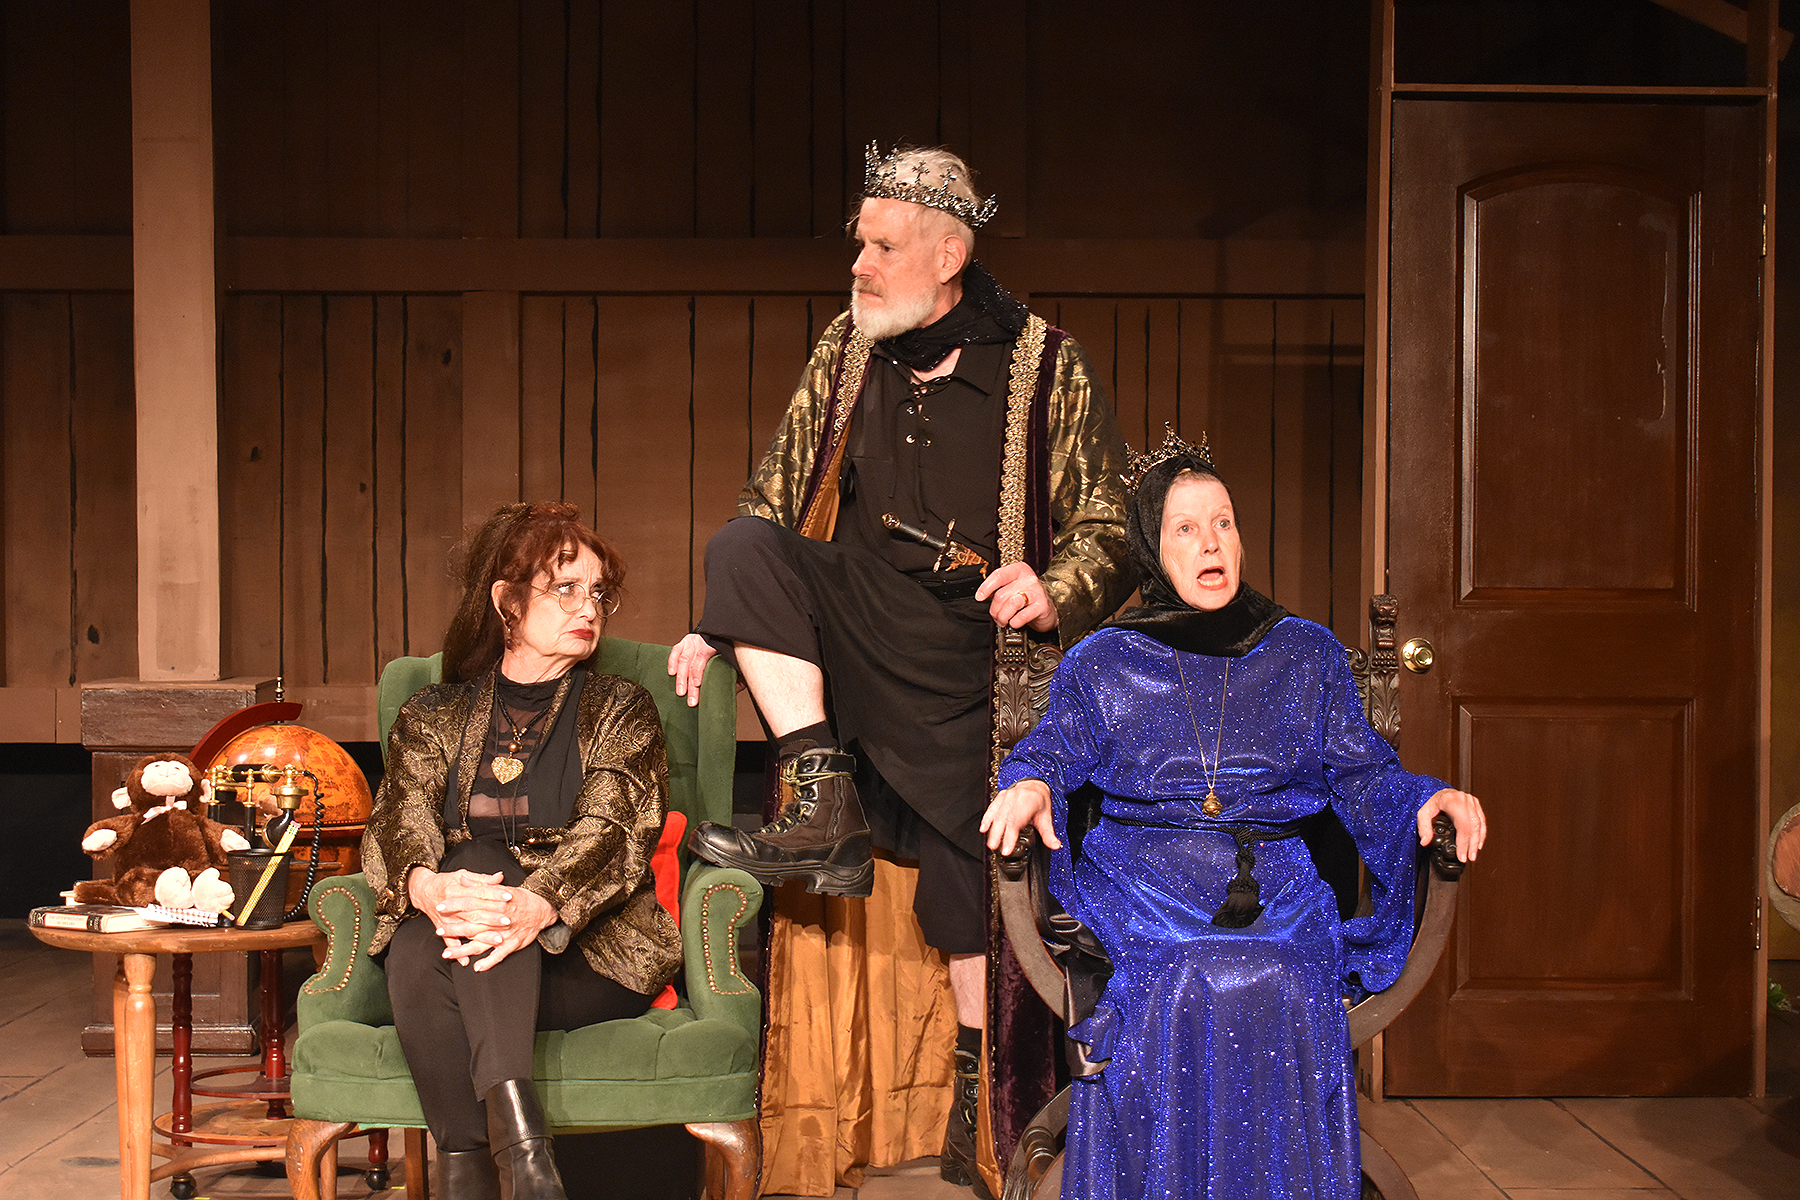 Constance Mellors (l.), Joe Nassi, Mary Elisabeth Somers in "Classic Couples Counseling" at Theatre West. Credit: Garry Kluger.